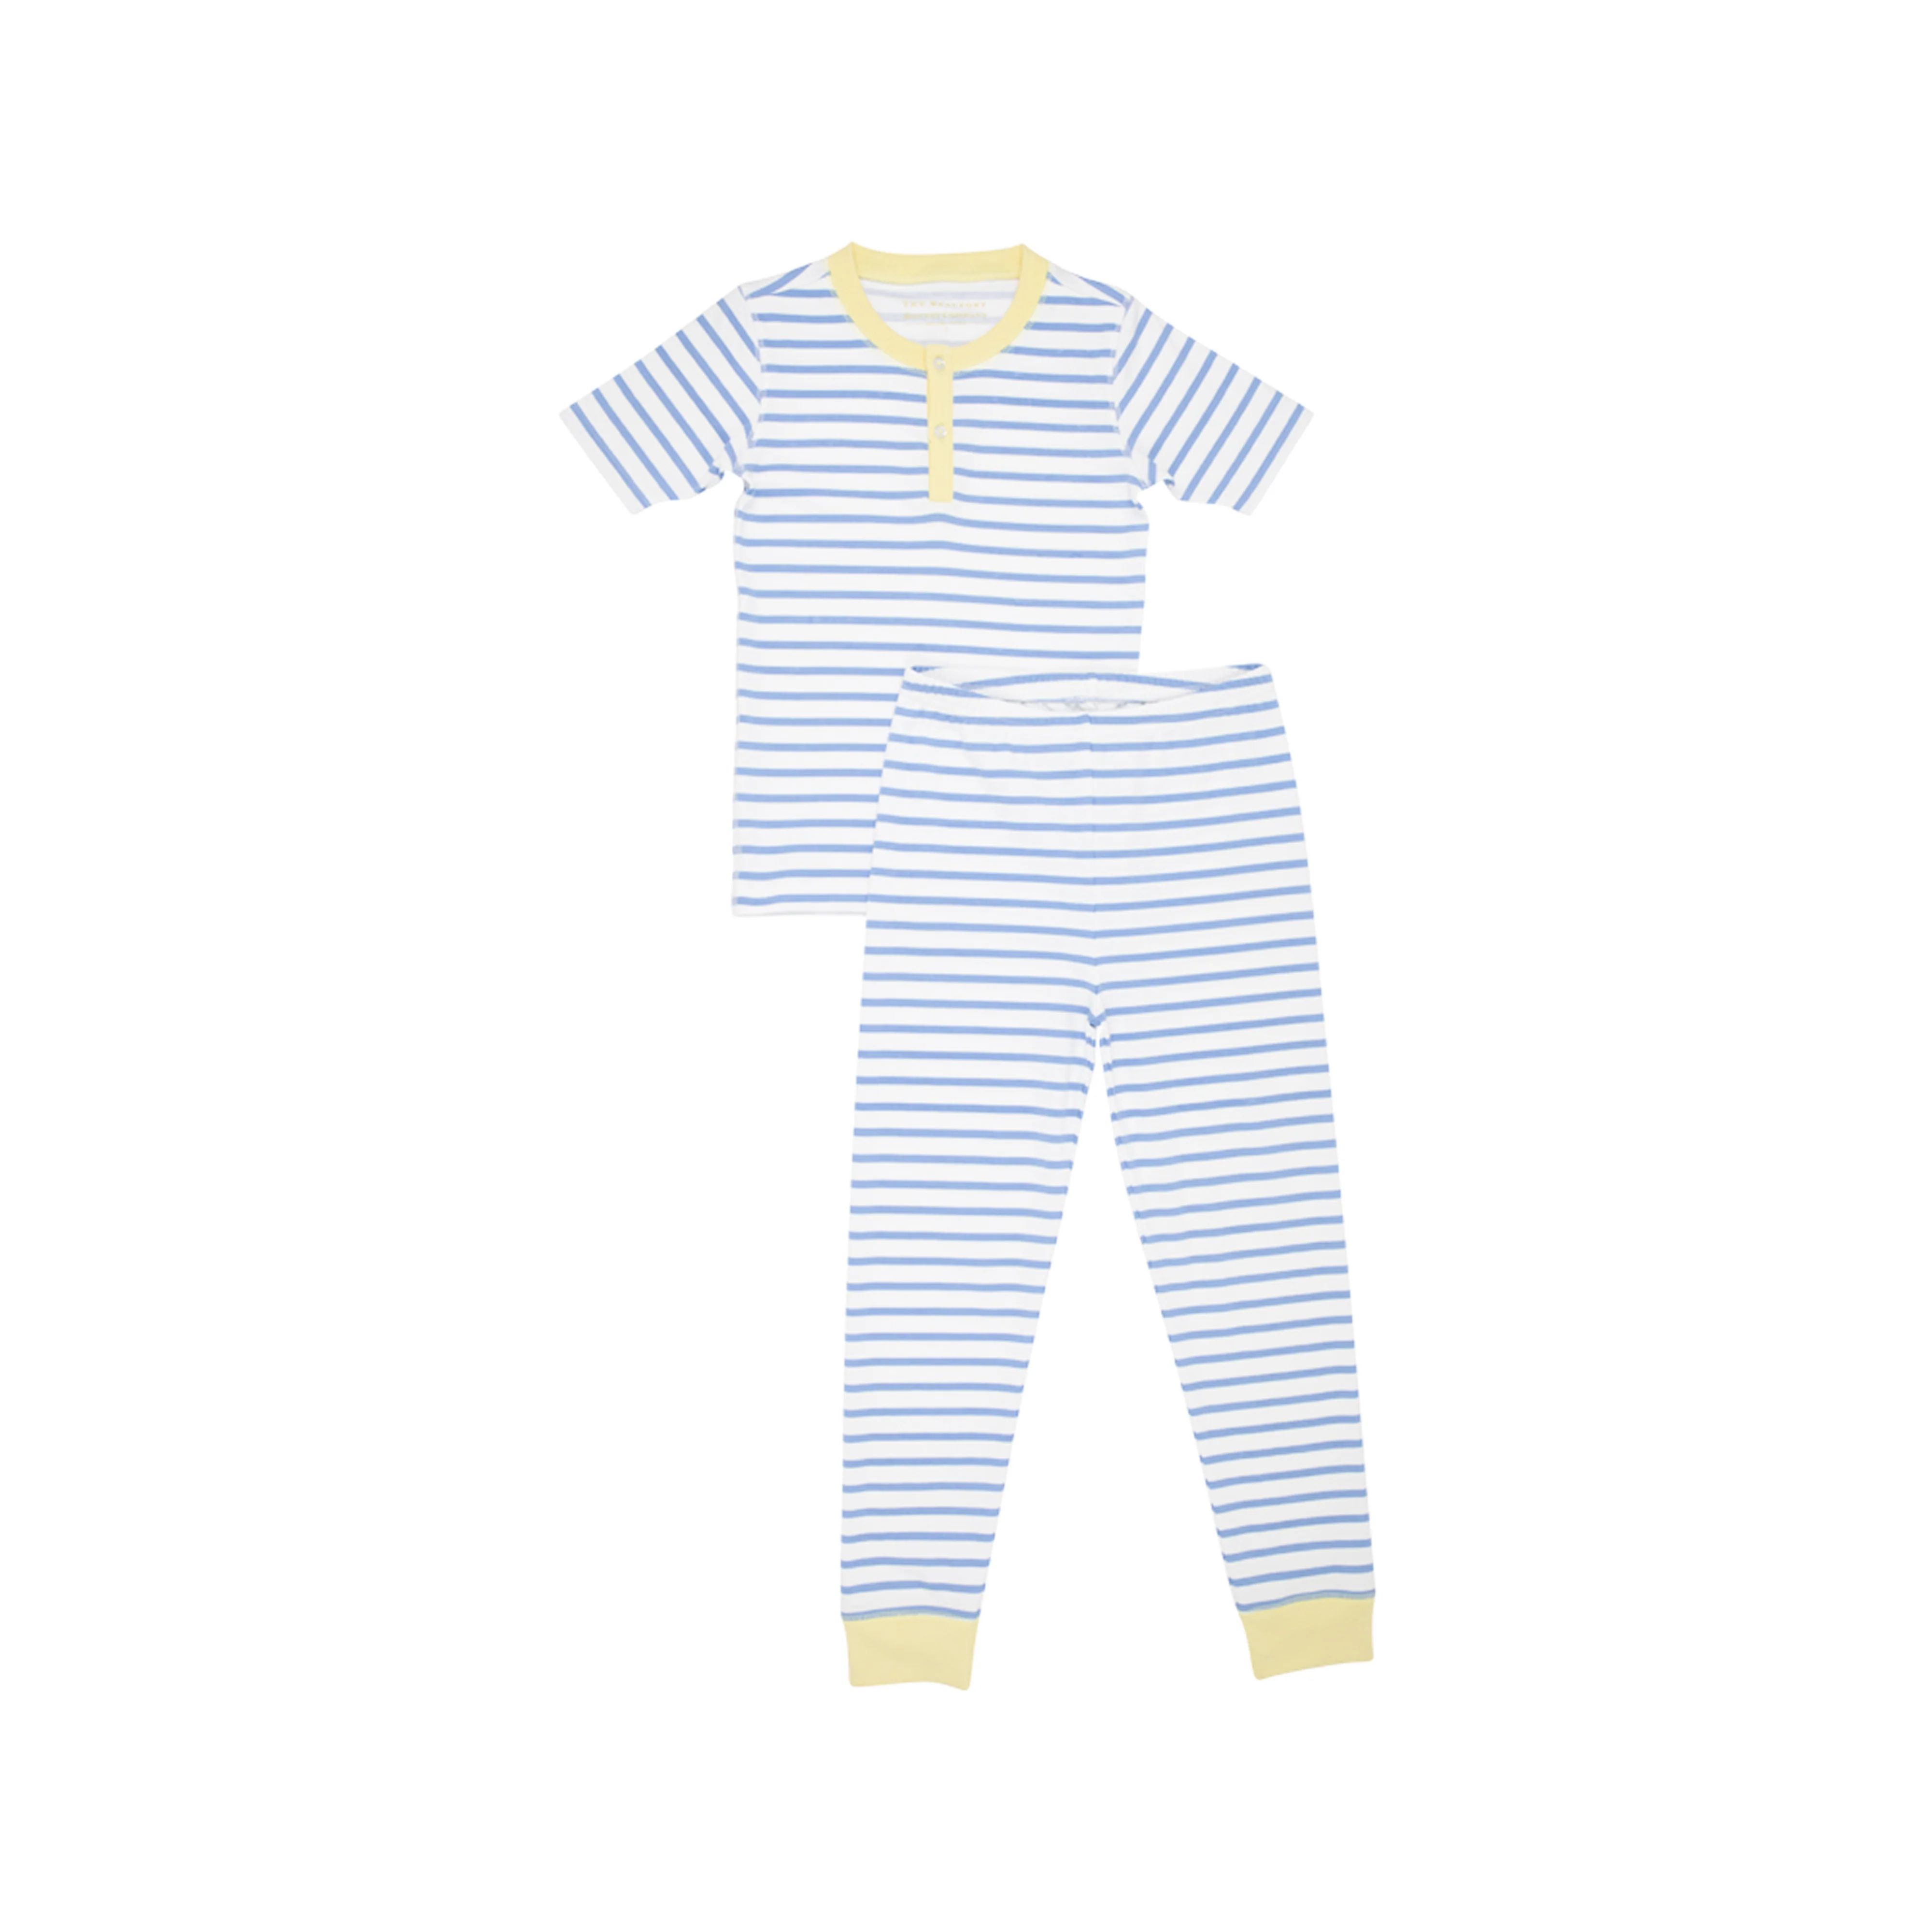 Sutton's Short Sleeve Set (Unisex) - Barbados Blue Stripe with Lake Worth Yellow | The Beaufort Bonnet Company